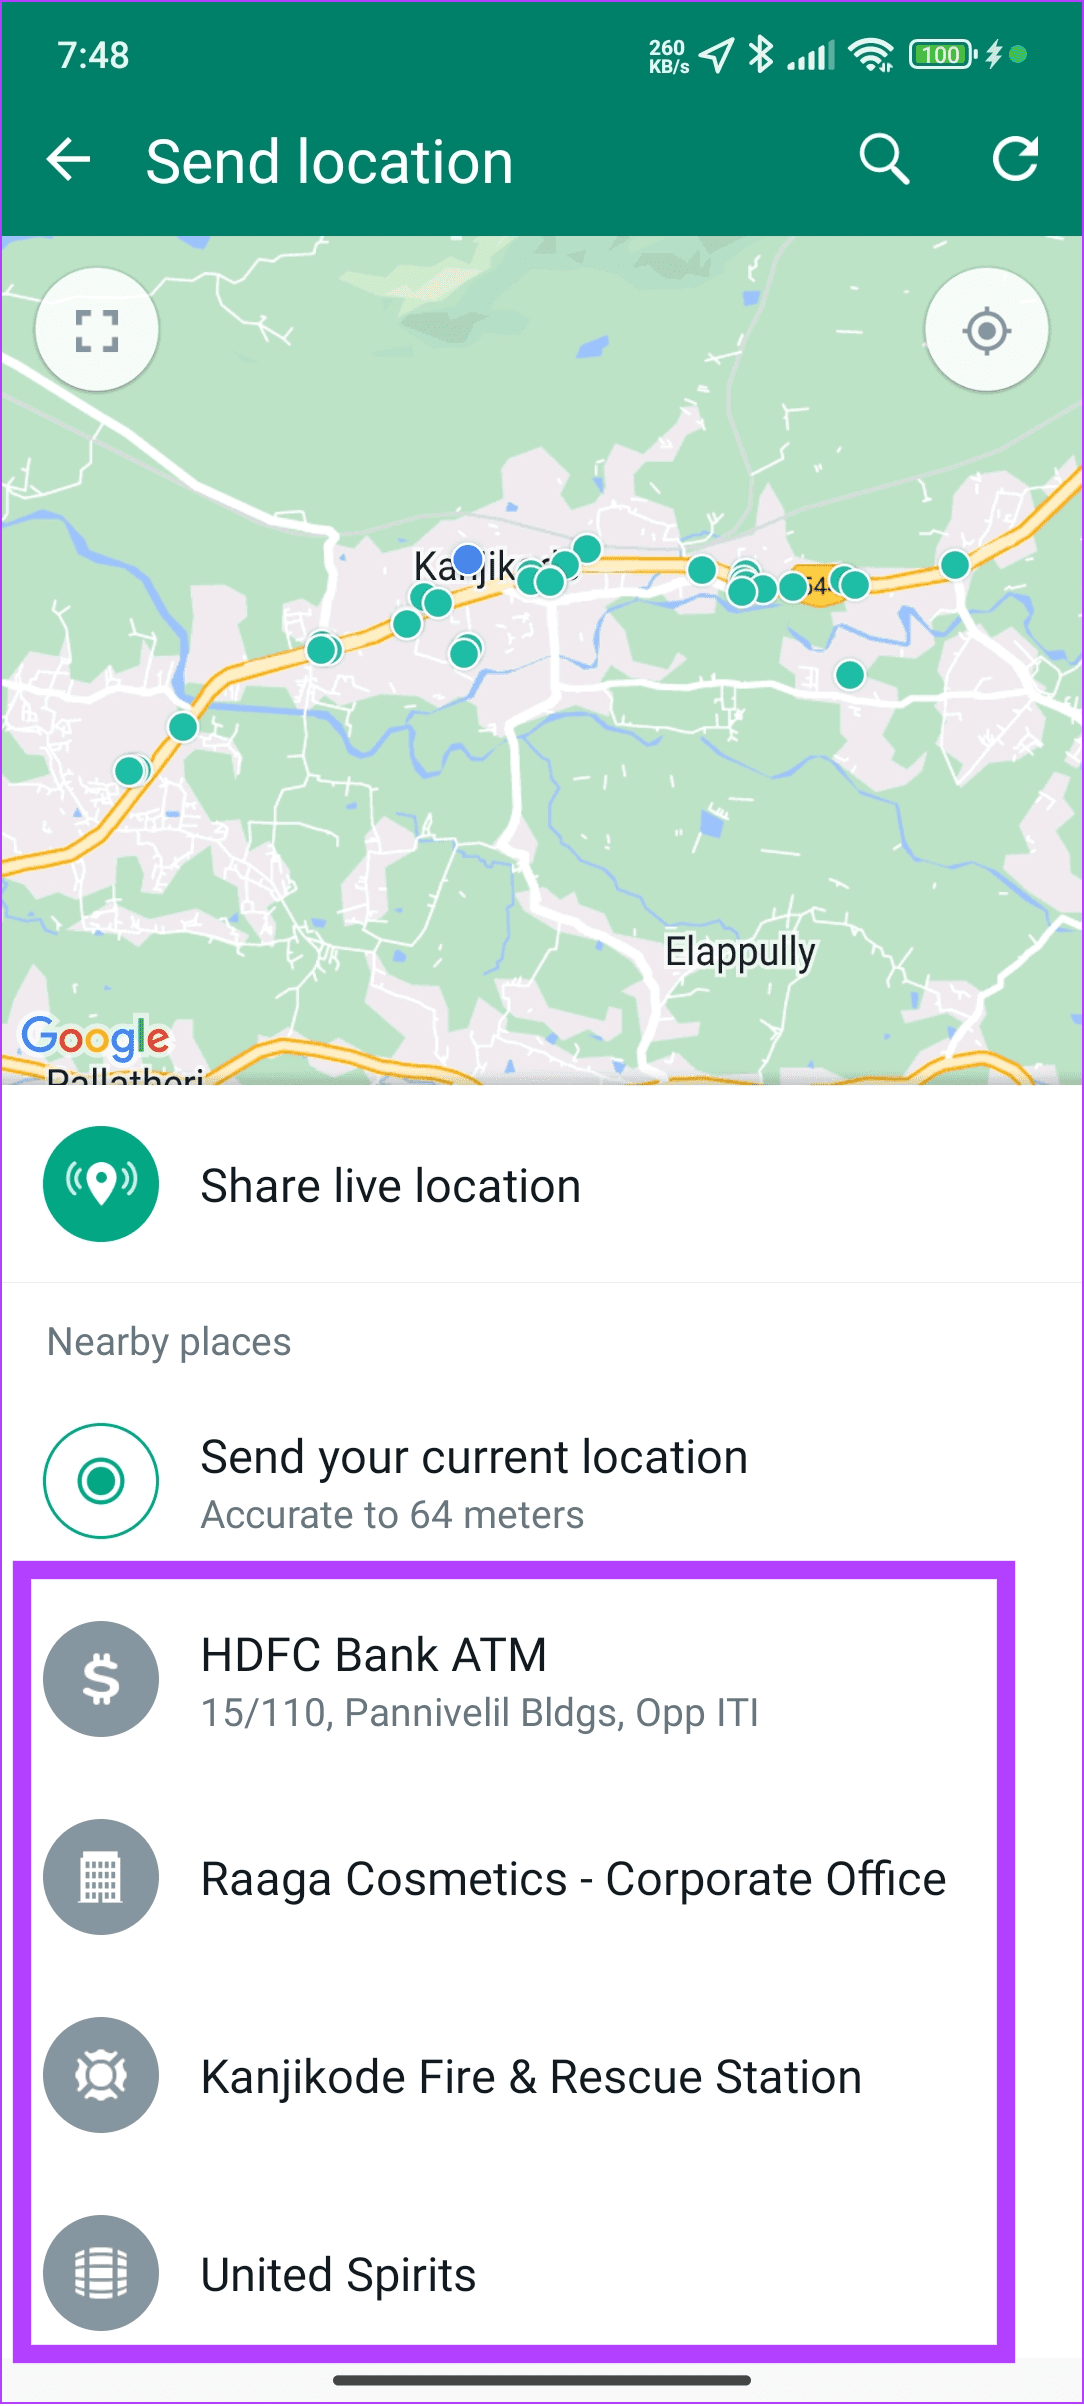 Choose any location under nearby places